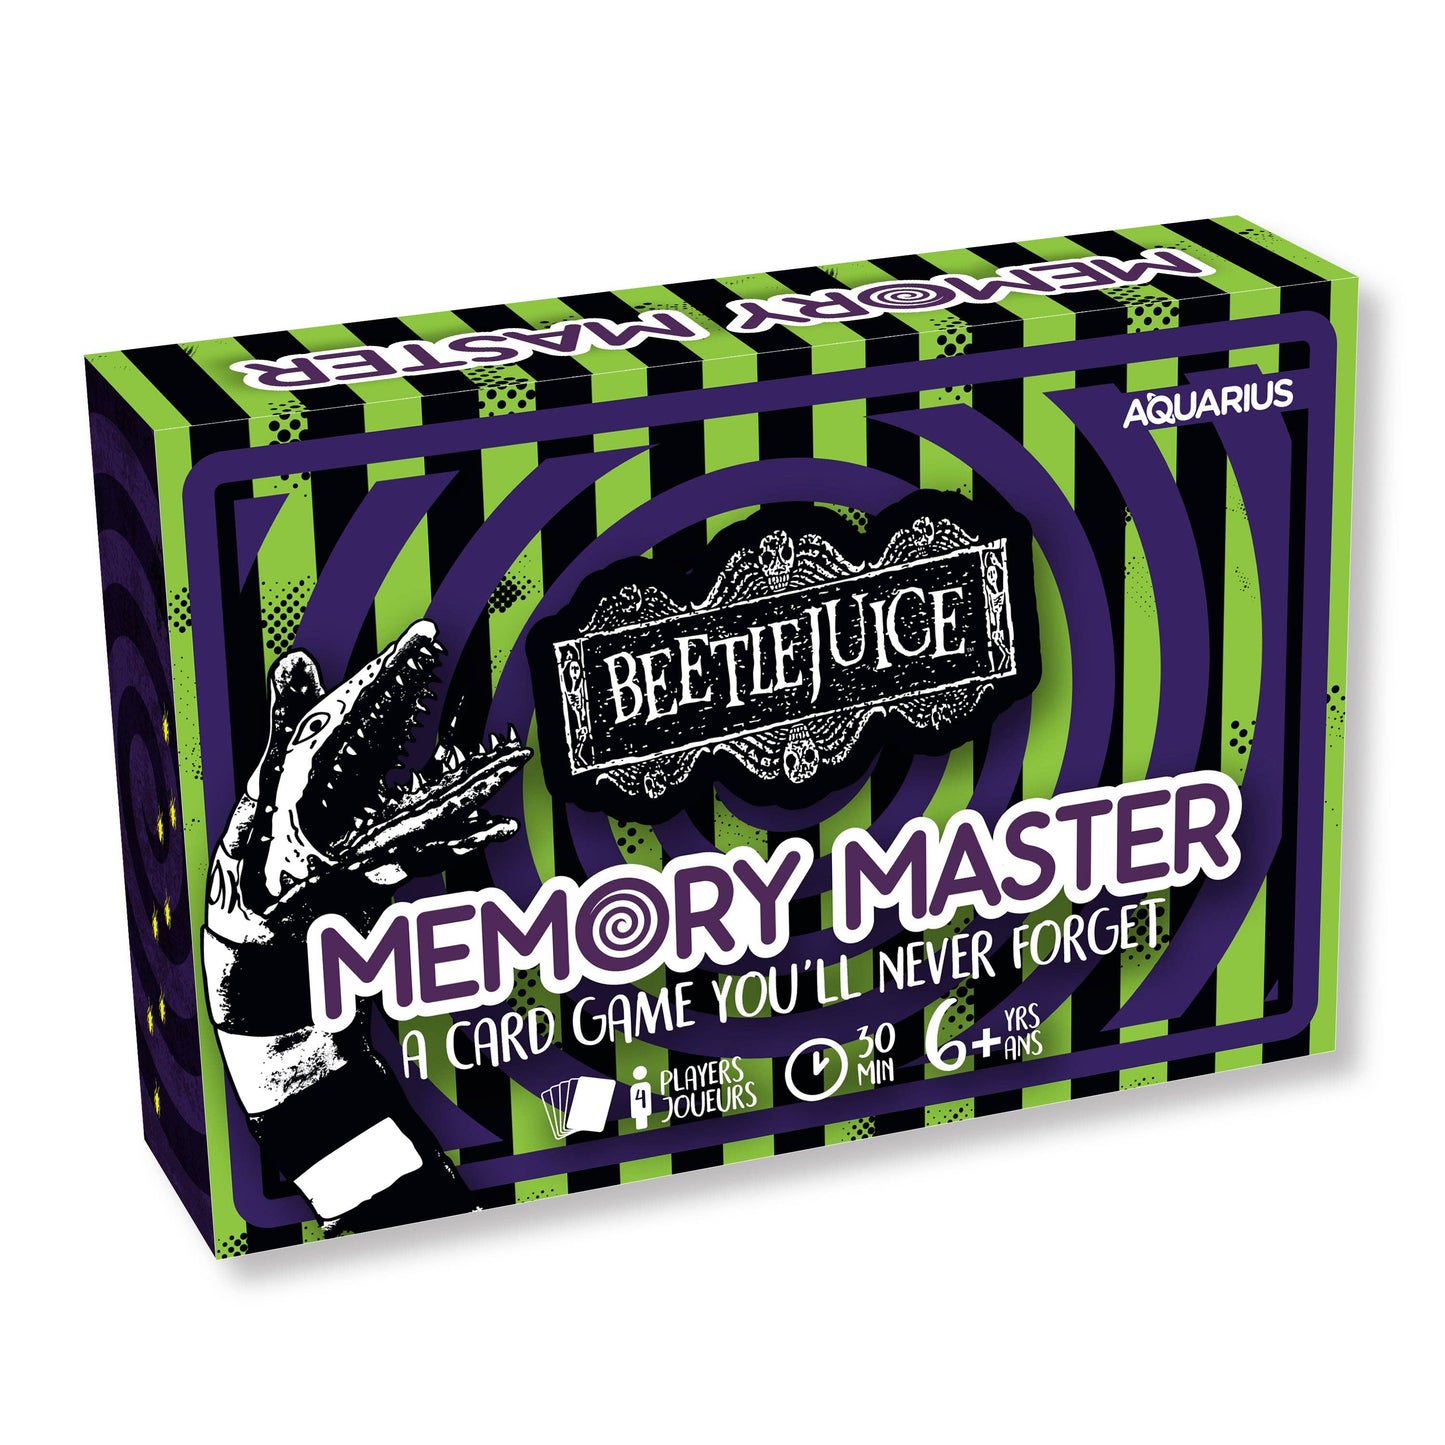 Put your memory skills to the test with this Beetlejuice Memory Master Card Game for the whole family! Partner up and compete, then crown the Memory Master. Perfect for ages 6 and up. Perfect Beetlejuice gift for all fans. Officially licensed merchandise.